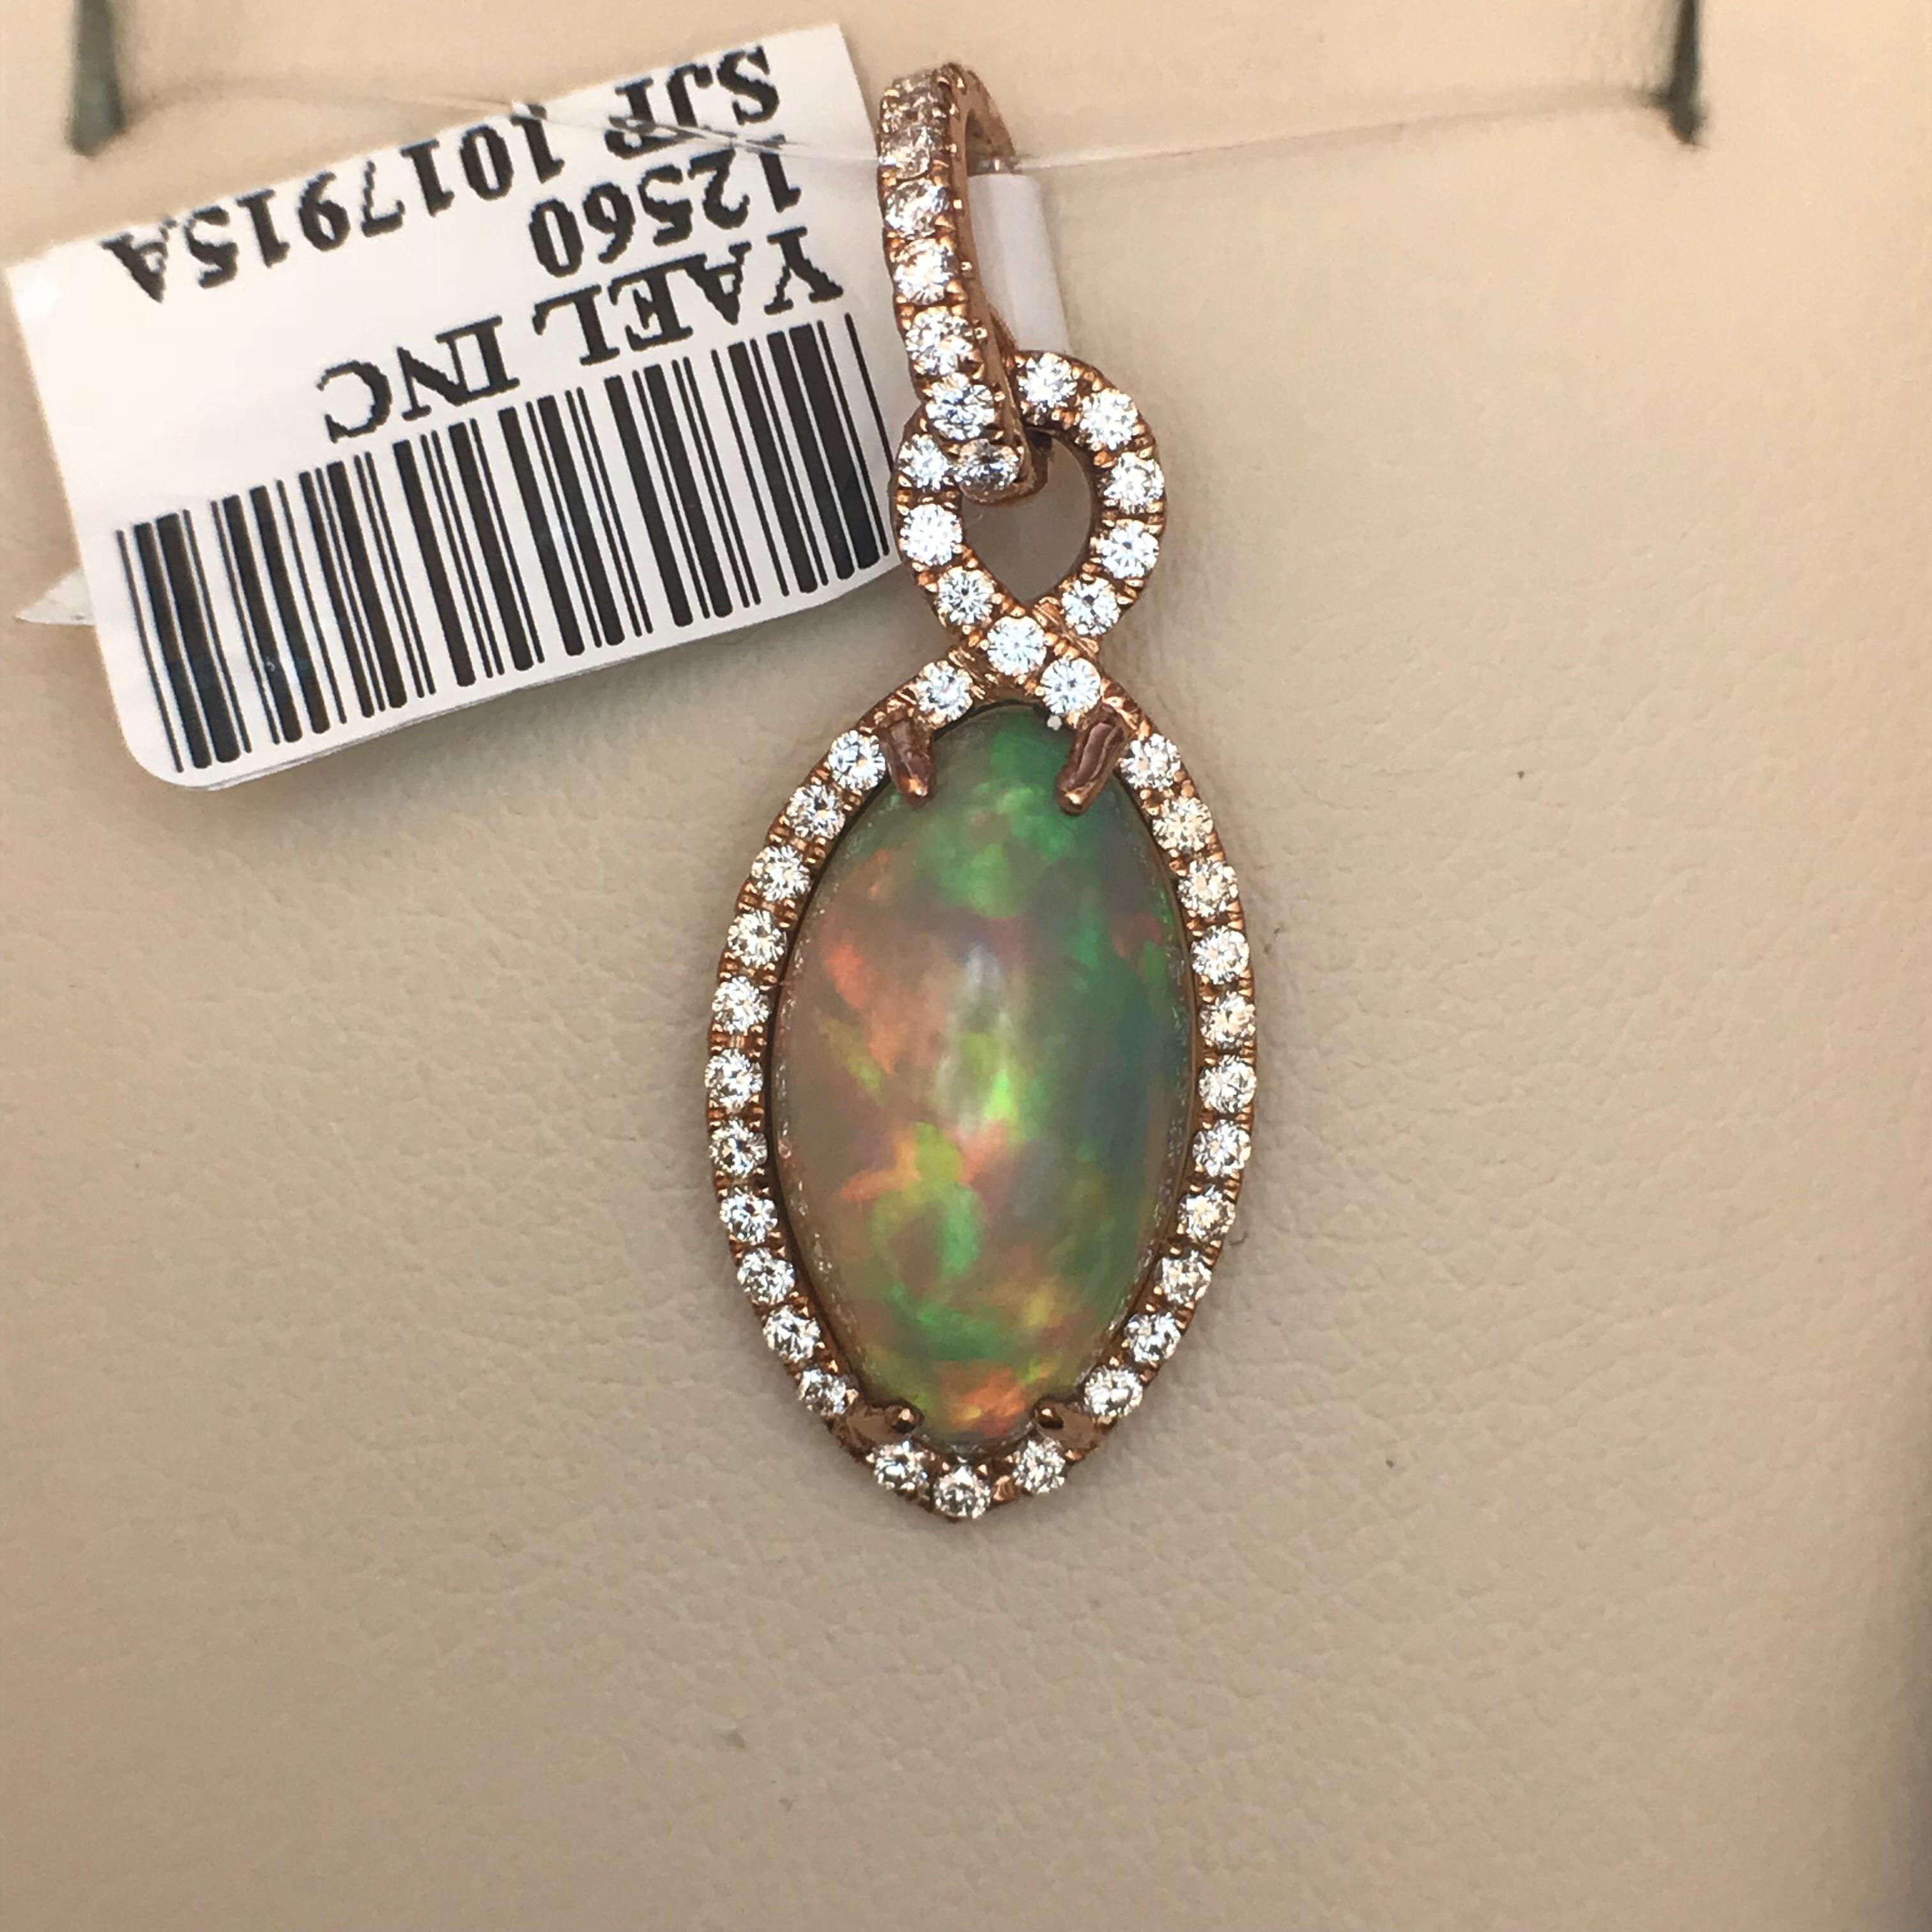 18kt Rose Gold
Marquise White Opal 3.13ct (16.26X9.03)
White Round Diamonds 0.39ct (G color VS clarity)